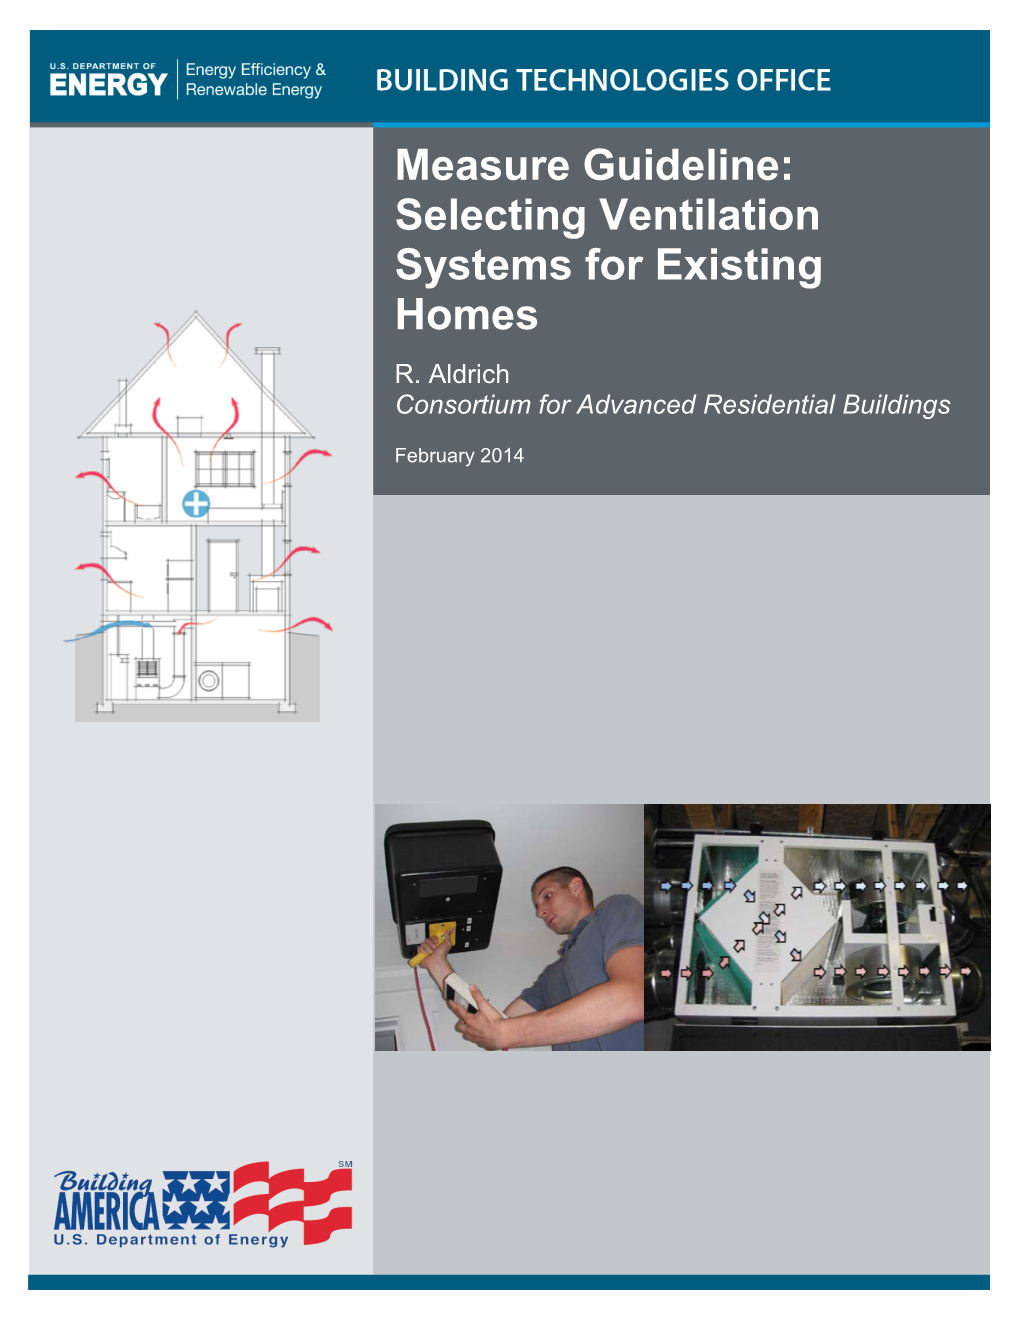 Measure Guideline: Selecting Ventilation Systems for Existing Homes R